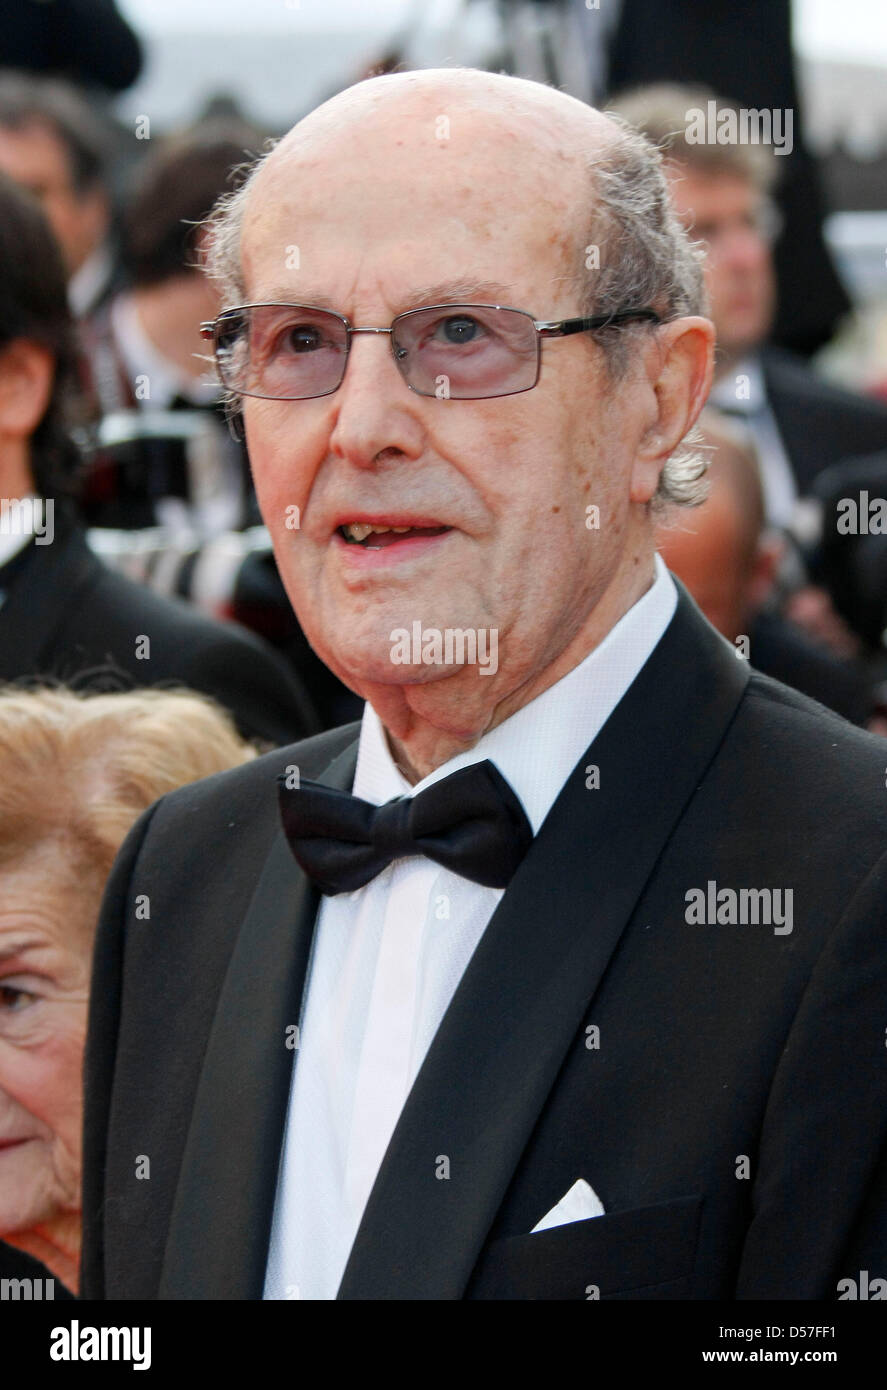 Portuguese director Manoel de Oliveira attends the premiere of the movie 'Tournee' at the 63rd Cannes Film Festival at the Palais des Festivals in Cannes, France, 13 May 2010. The Cannes Film Festival 2010 runs from 12 to 23 May 2010. Photo: Hubert Boesl Stock Photo